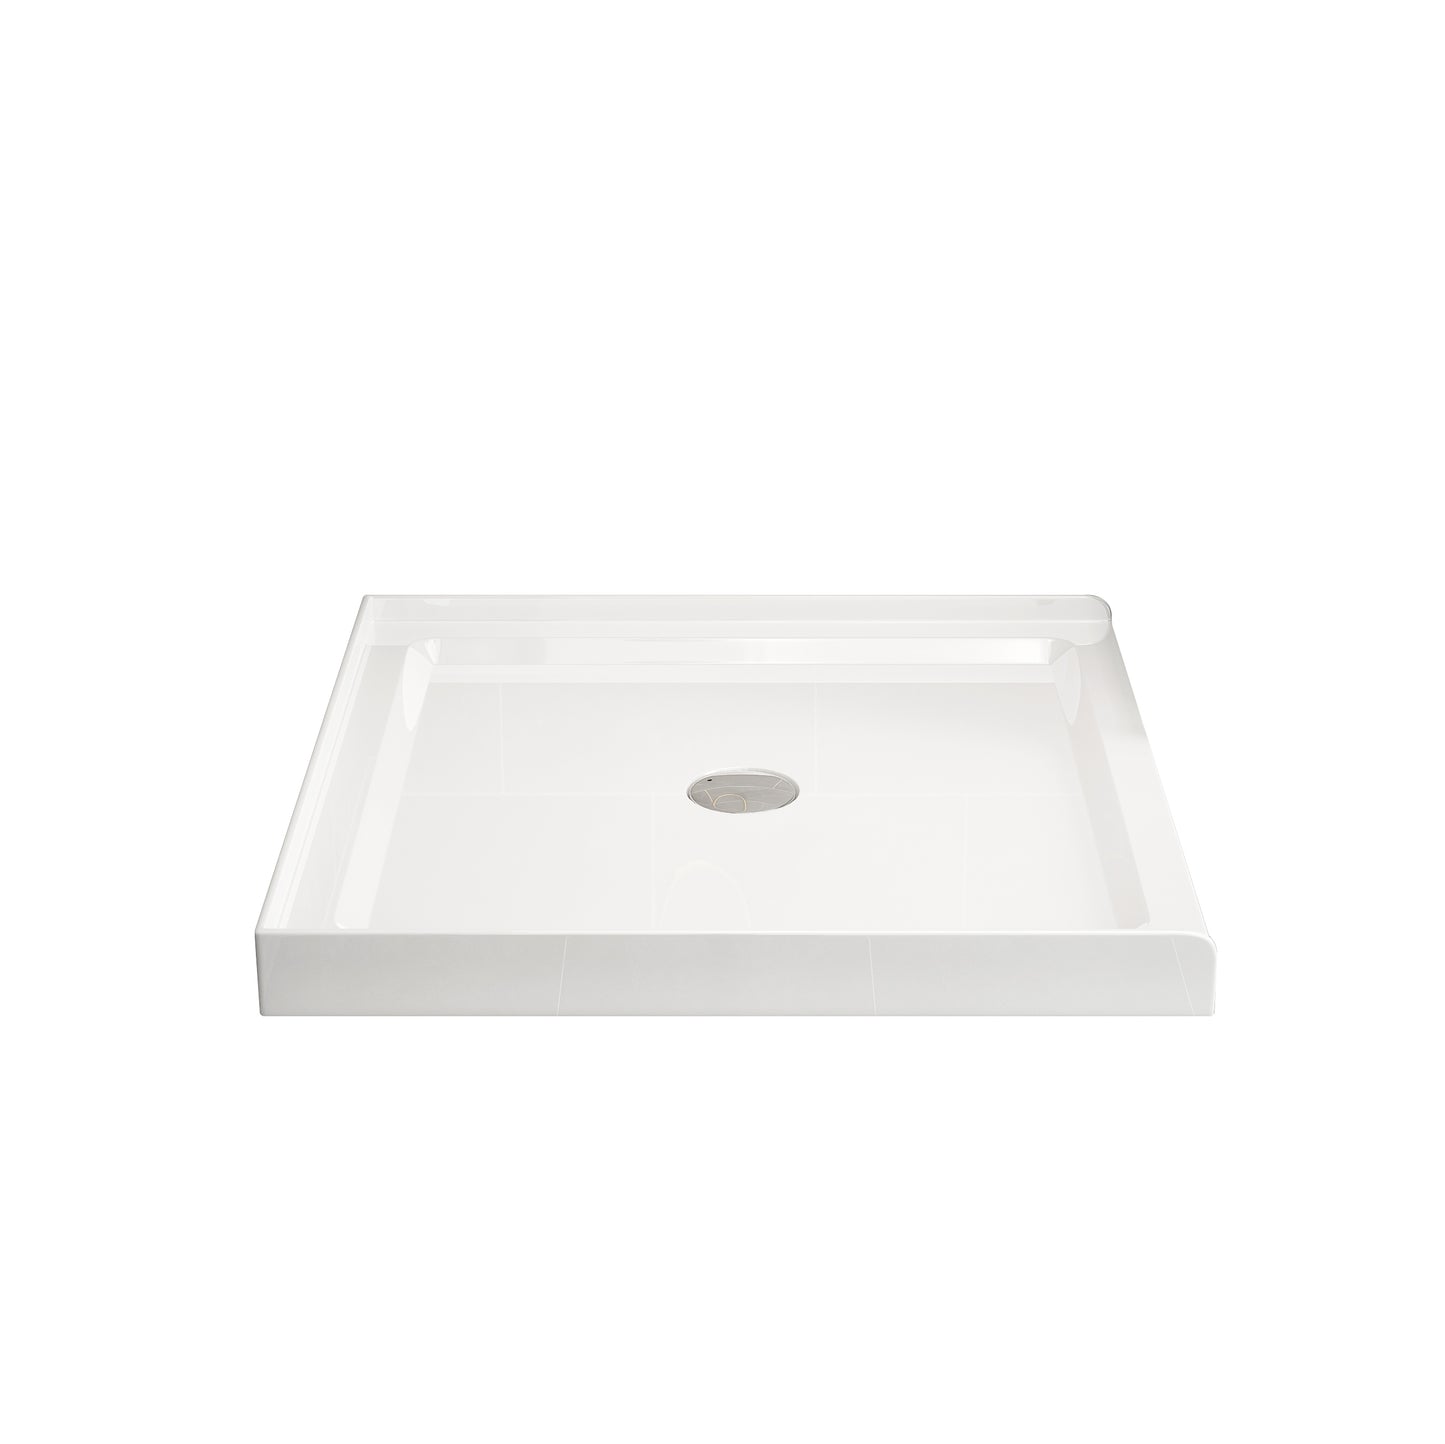 36 x 36 inch Acrylic Shower Base Pan for Tile color:white 